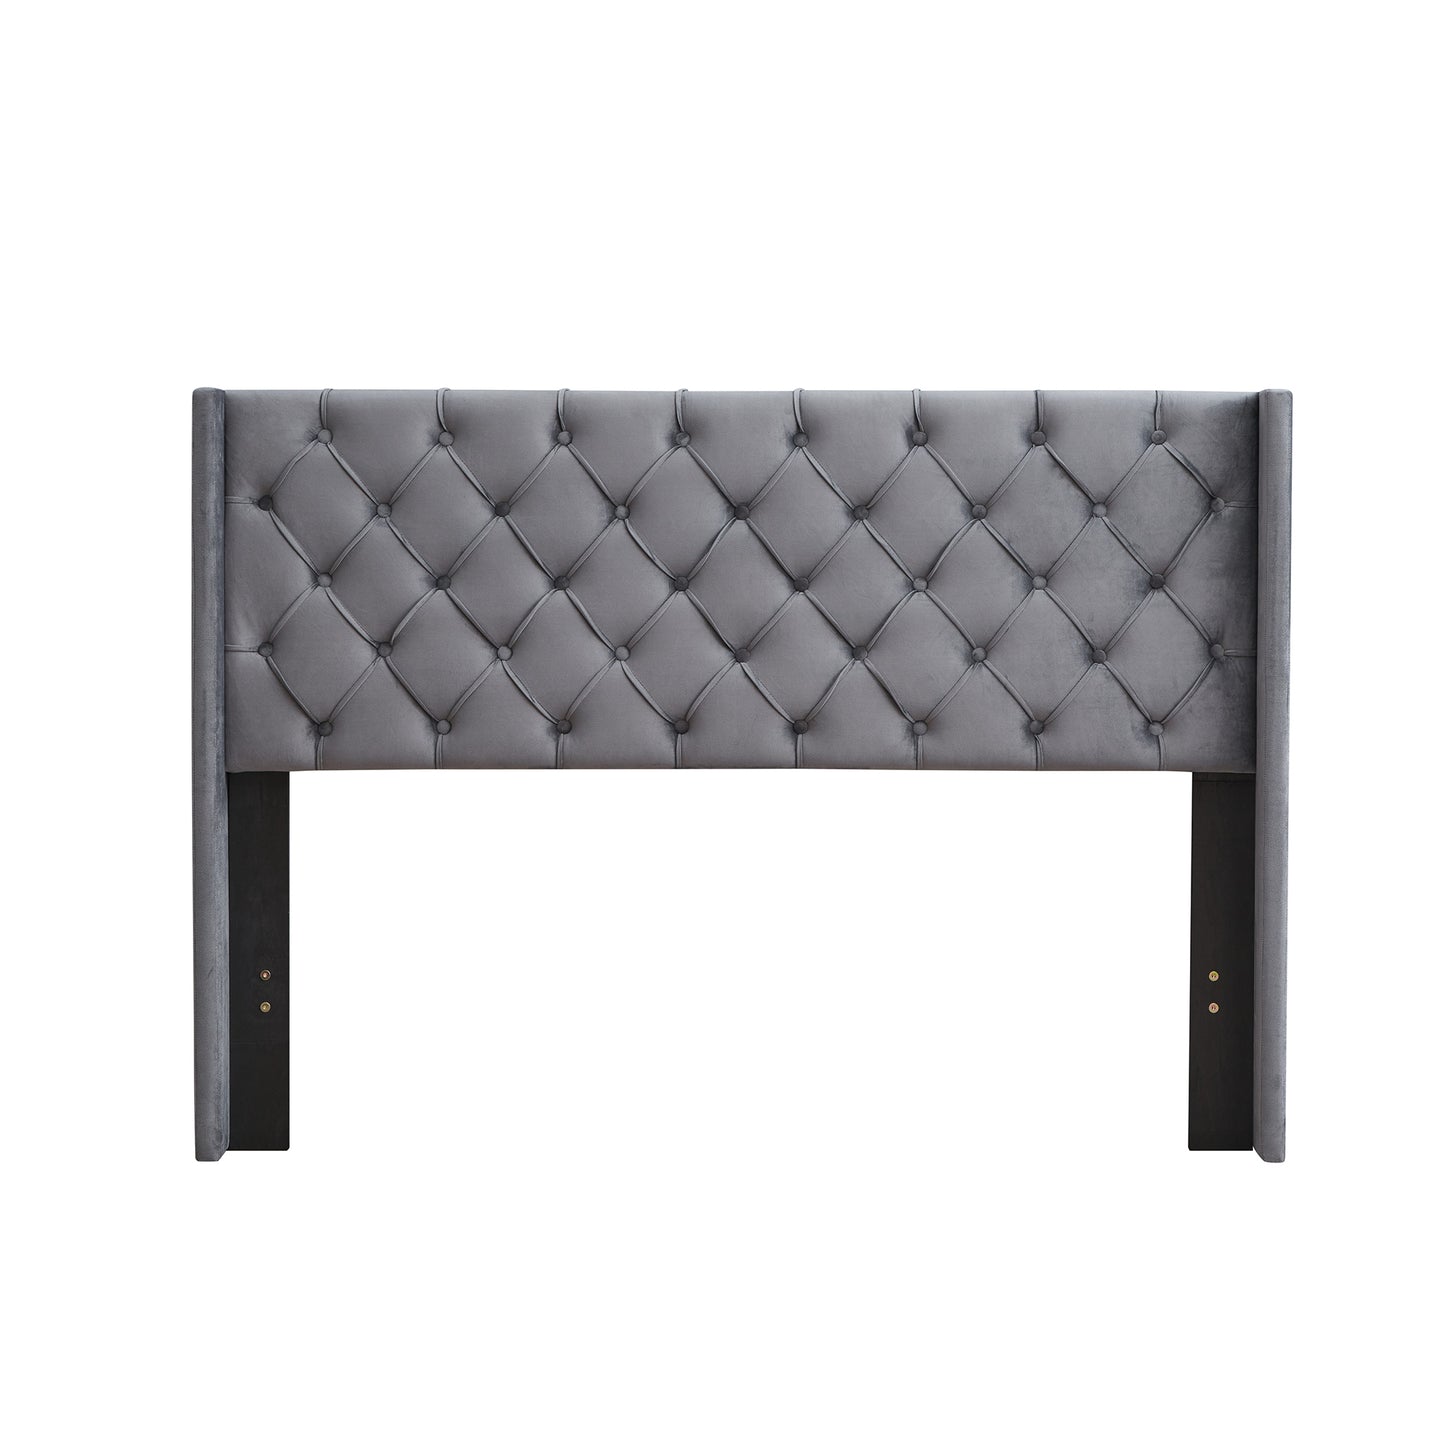 Odessa Velvet Button Tufted Queen Upholstered Bed in Grey Fabric